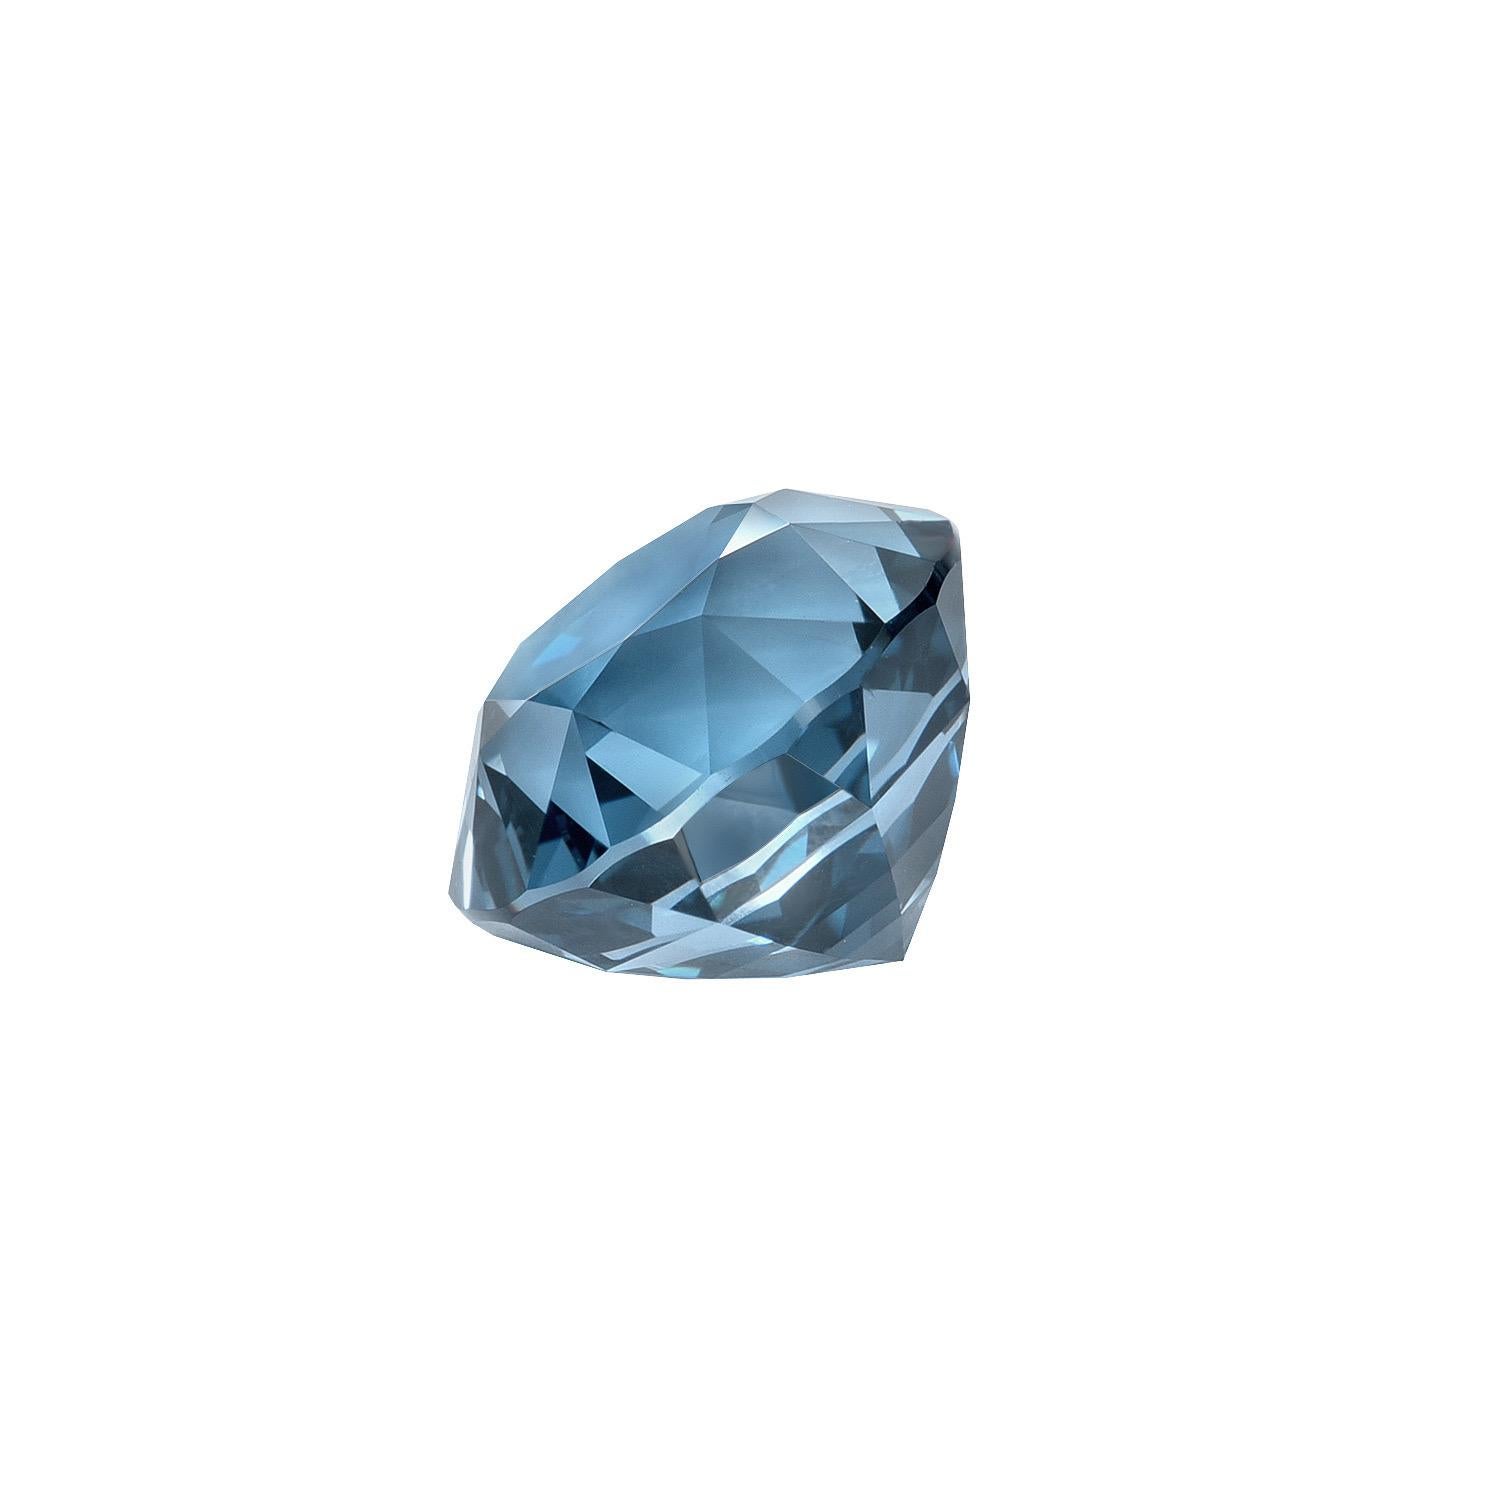 Rare and exclusive 4.15 carat grayish Blue Spinel round gem, offered loose to a devoted gemstone collector.
Returns are accepted and paid by us within 7 days of delivery.
We offer supreme custom jewelry work upon request. Please contact us for more